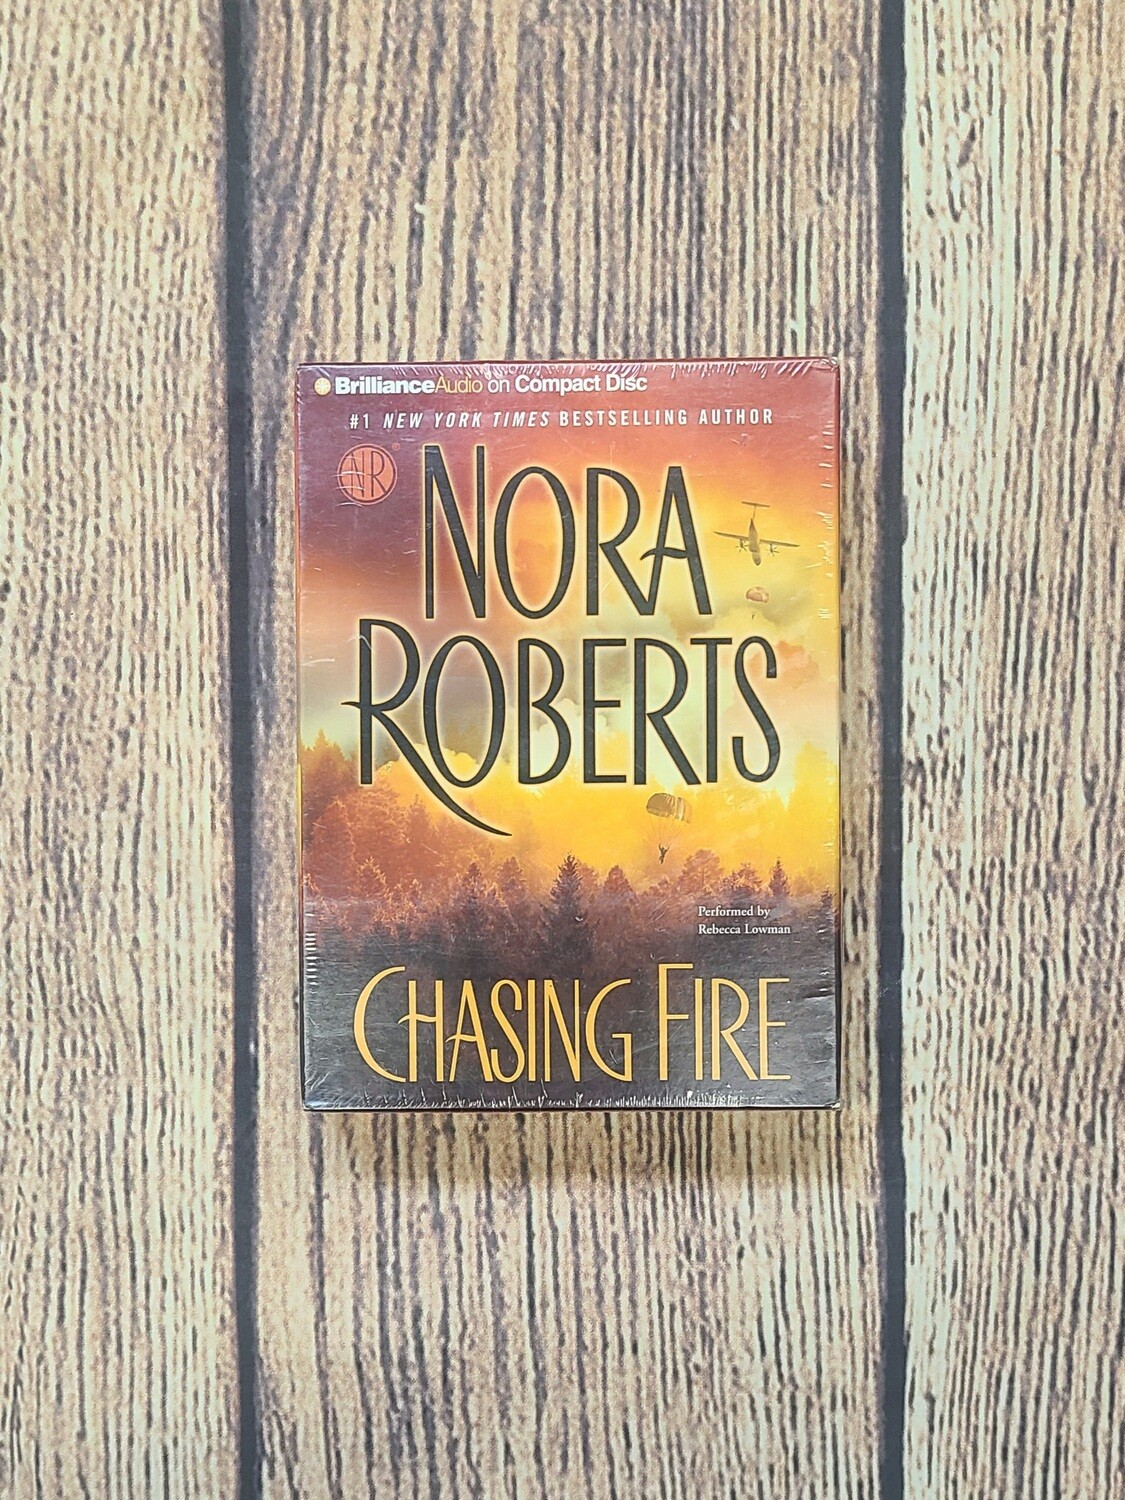 Chasing Fire by Nora Roberts AudioBook